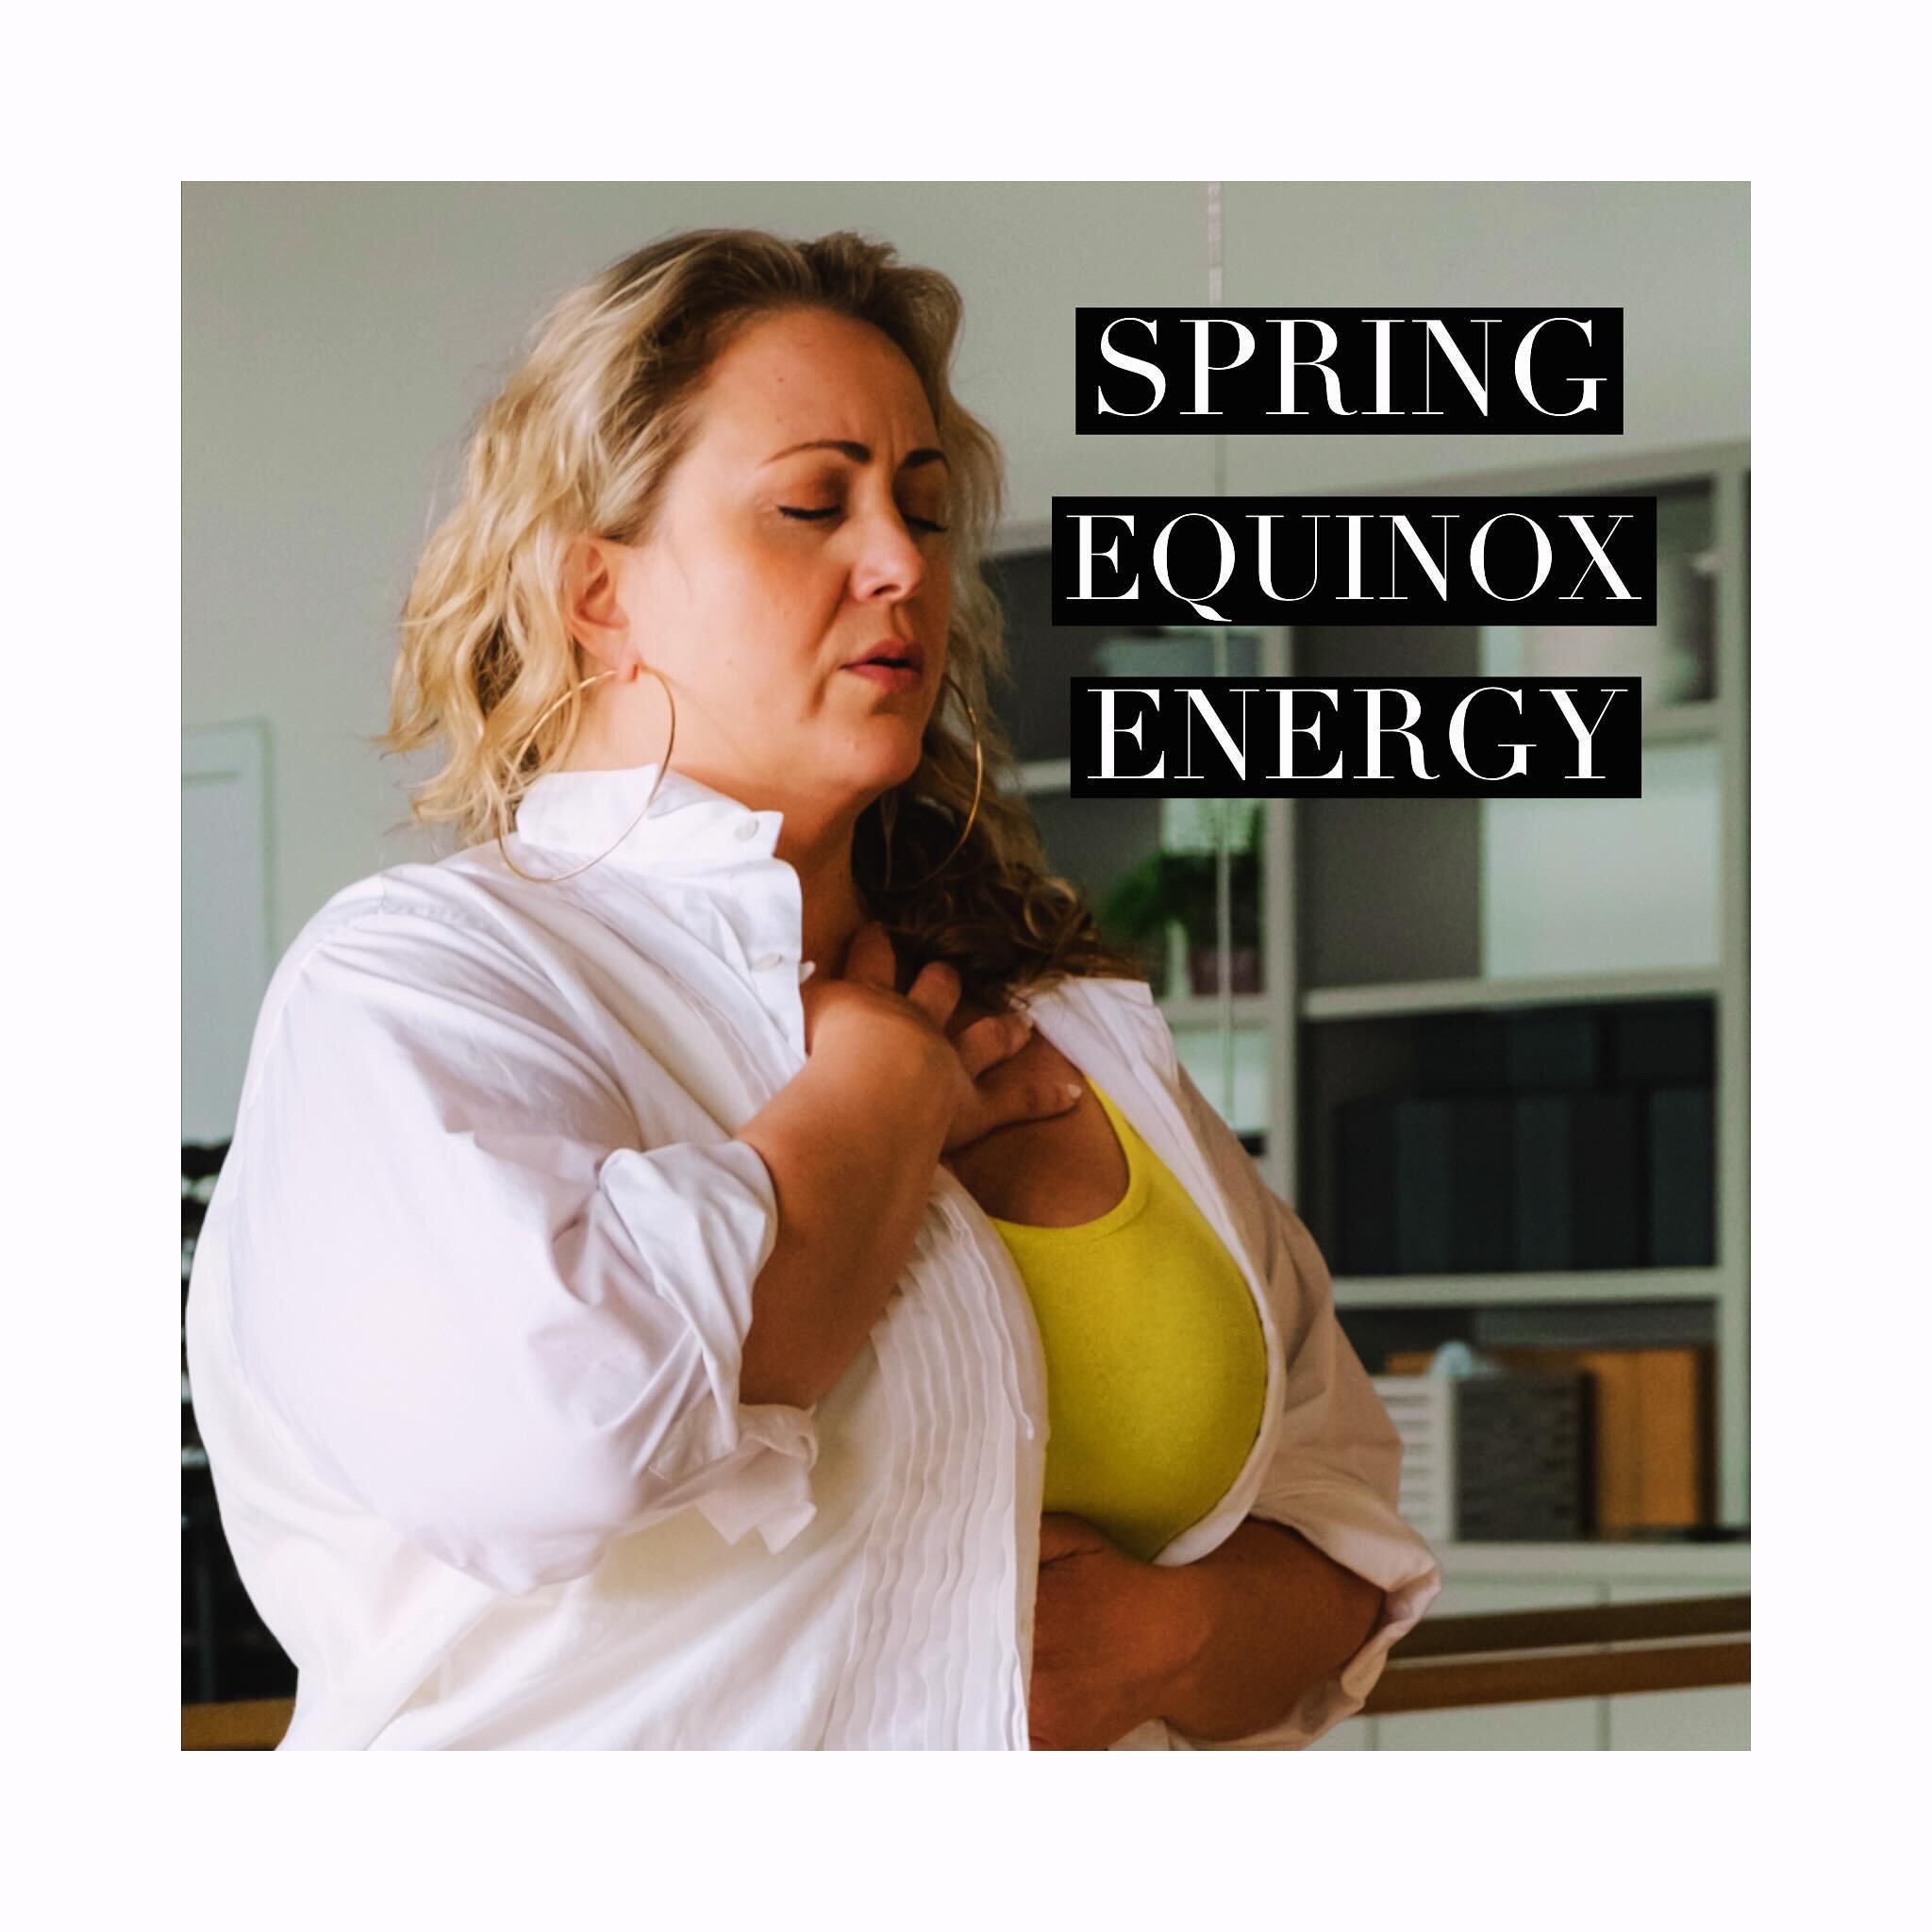 Hey hot stuff. A little snippet from my Equinox email to my list&hellip;
&bull;
Spring Equinox is upon us and I&rsquo;m feeling my metaphorical flower pushing up through the damp, dark soil. I&rsquo;m an Aries (duh!) and this time of year always feel